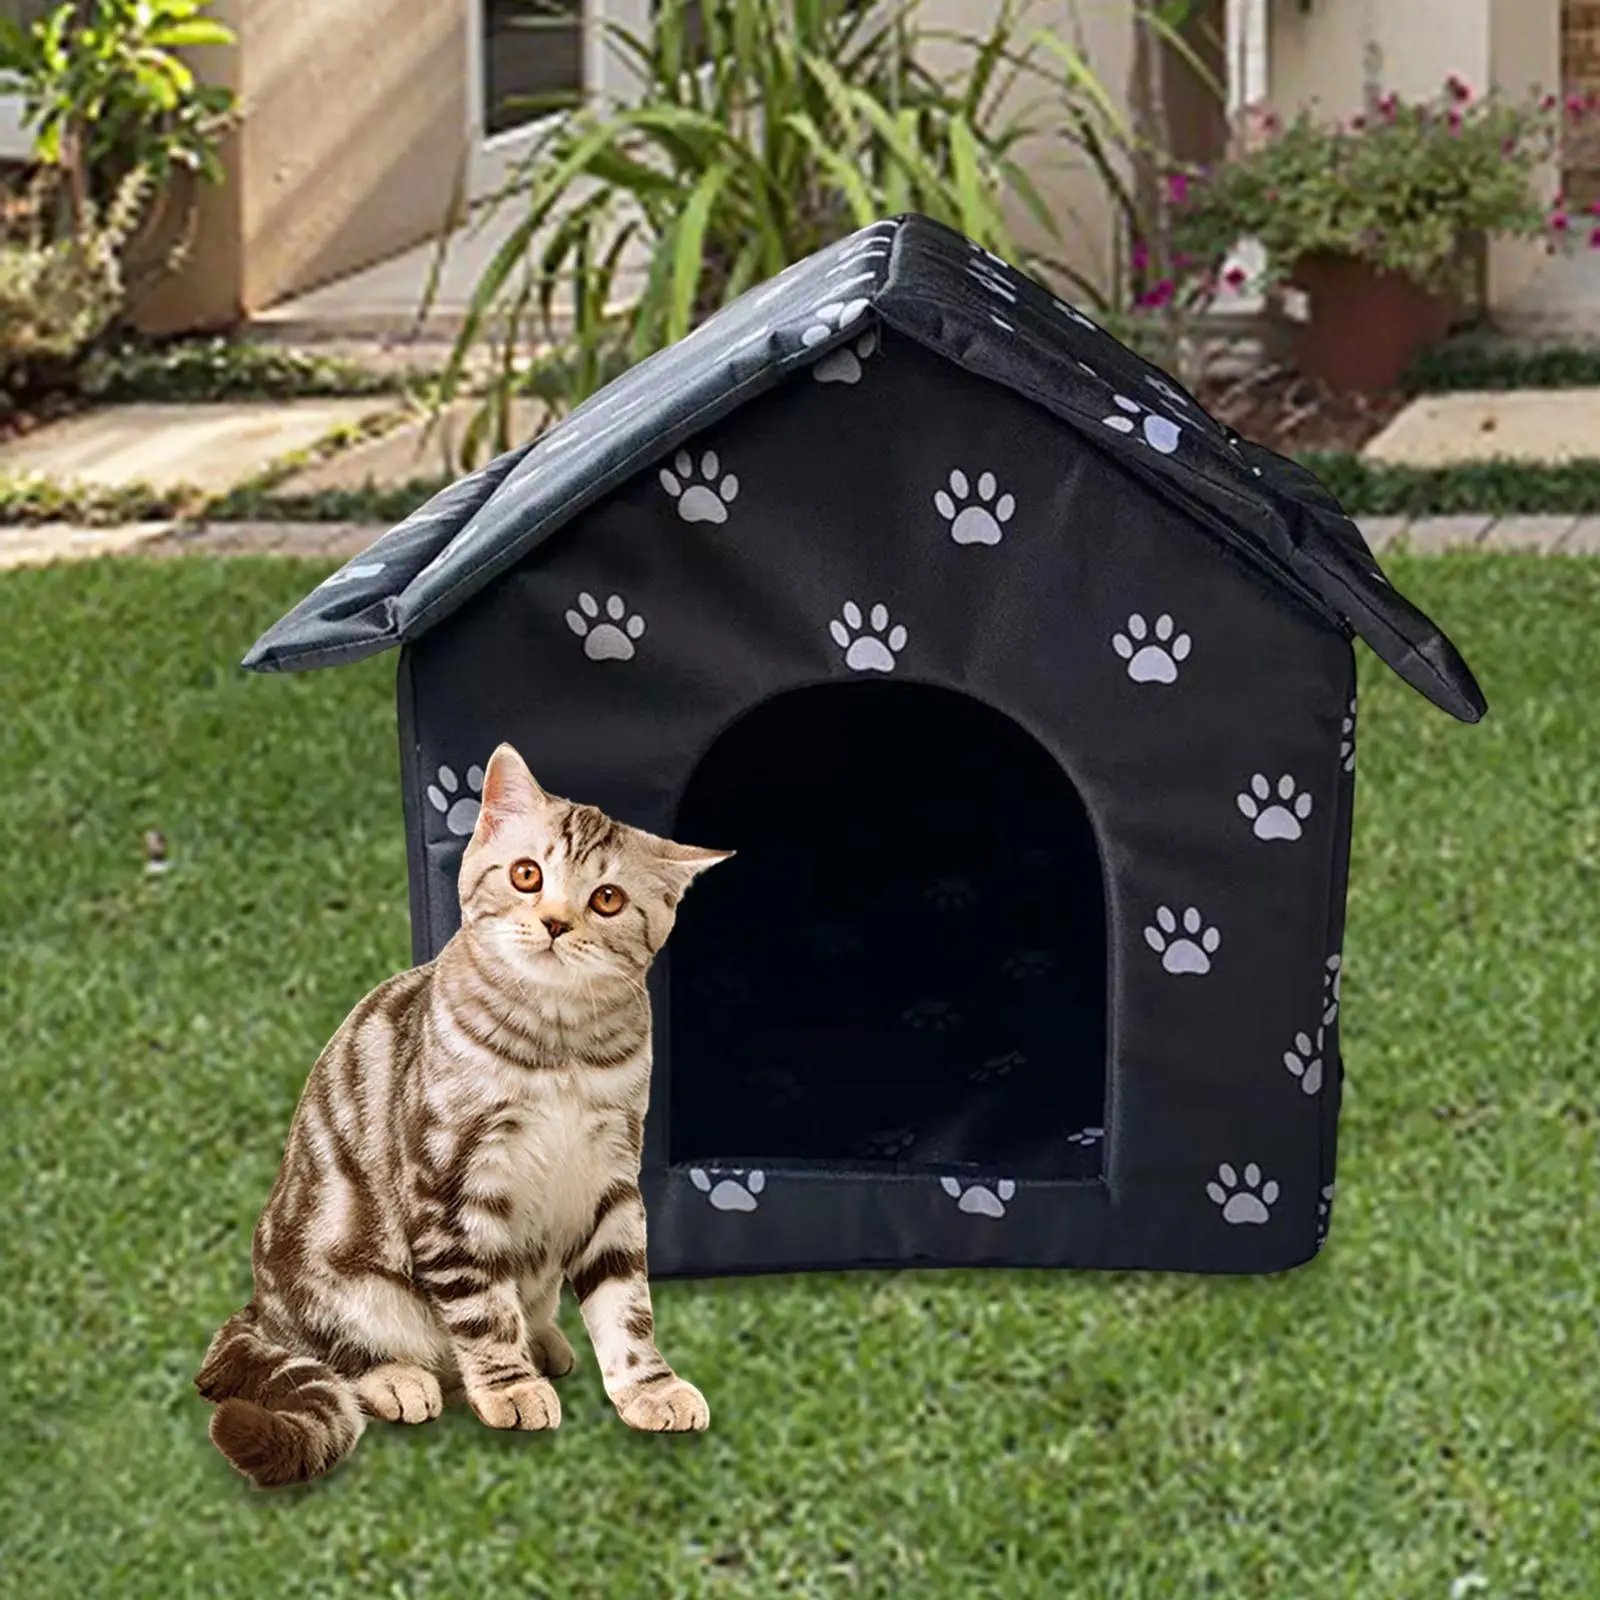 Oxford Cloth  House Stray Cats Shelter Versatile for Outdoor Indoor  zippered Connection Method